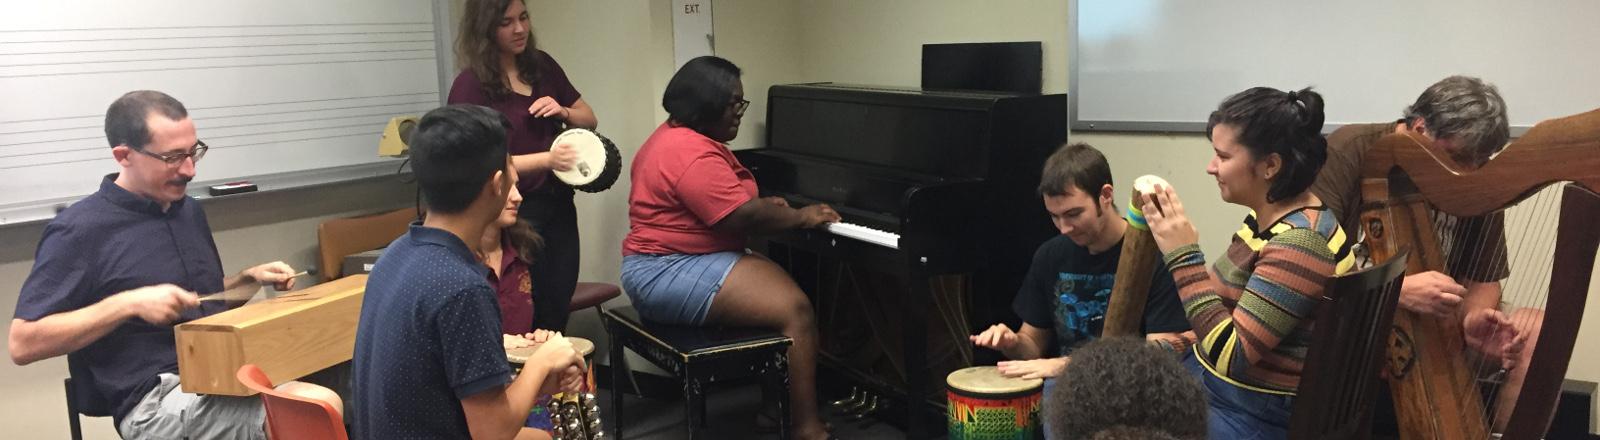 Loyola School of Music Music Therapy Majors practice percussion during improvisation class.